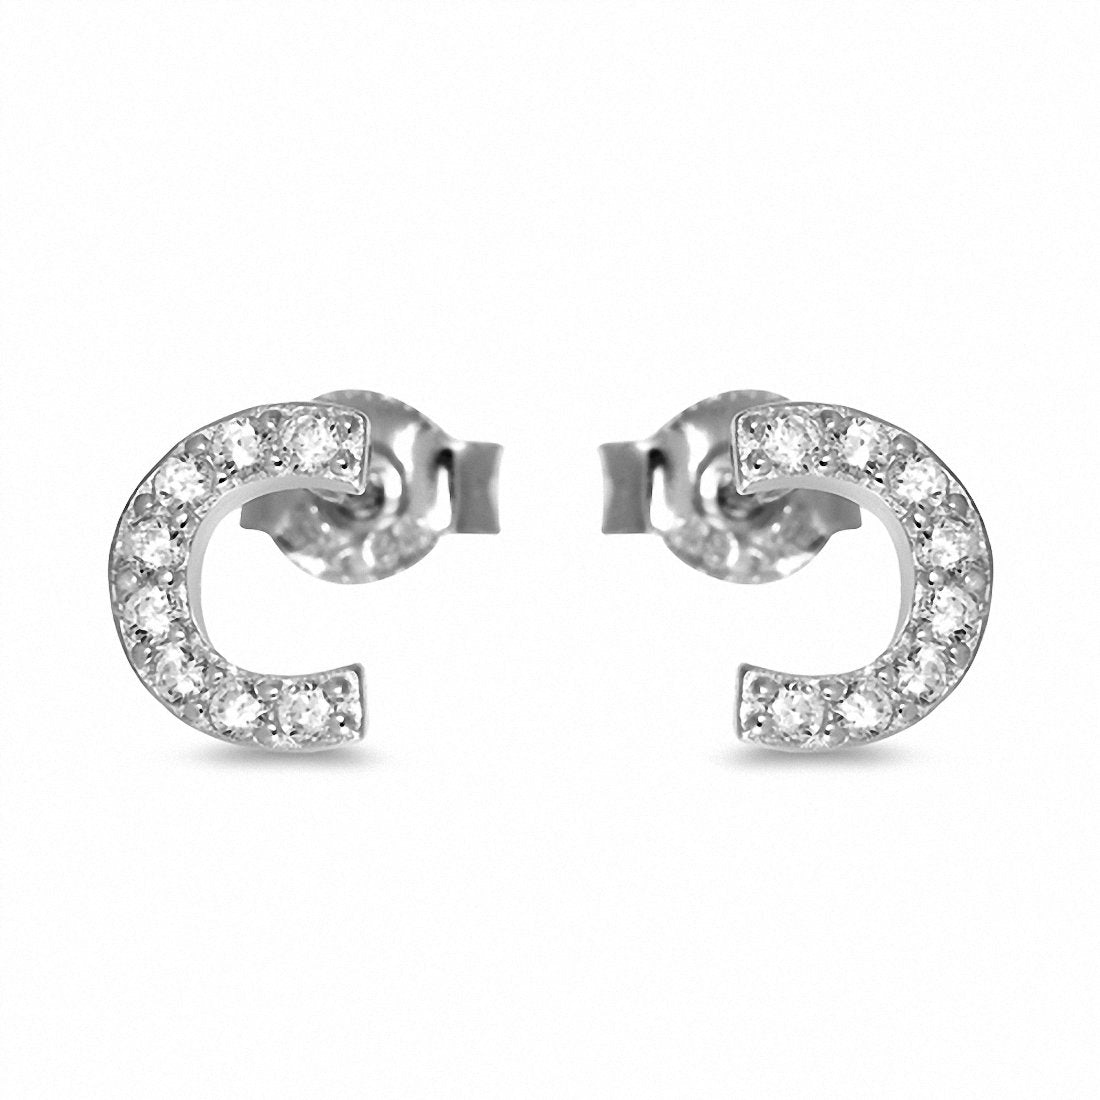 Fashion Curve Stud Earrings Round Cubic Zirconia 925 Sterling Silver